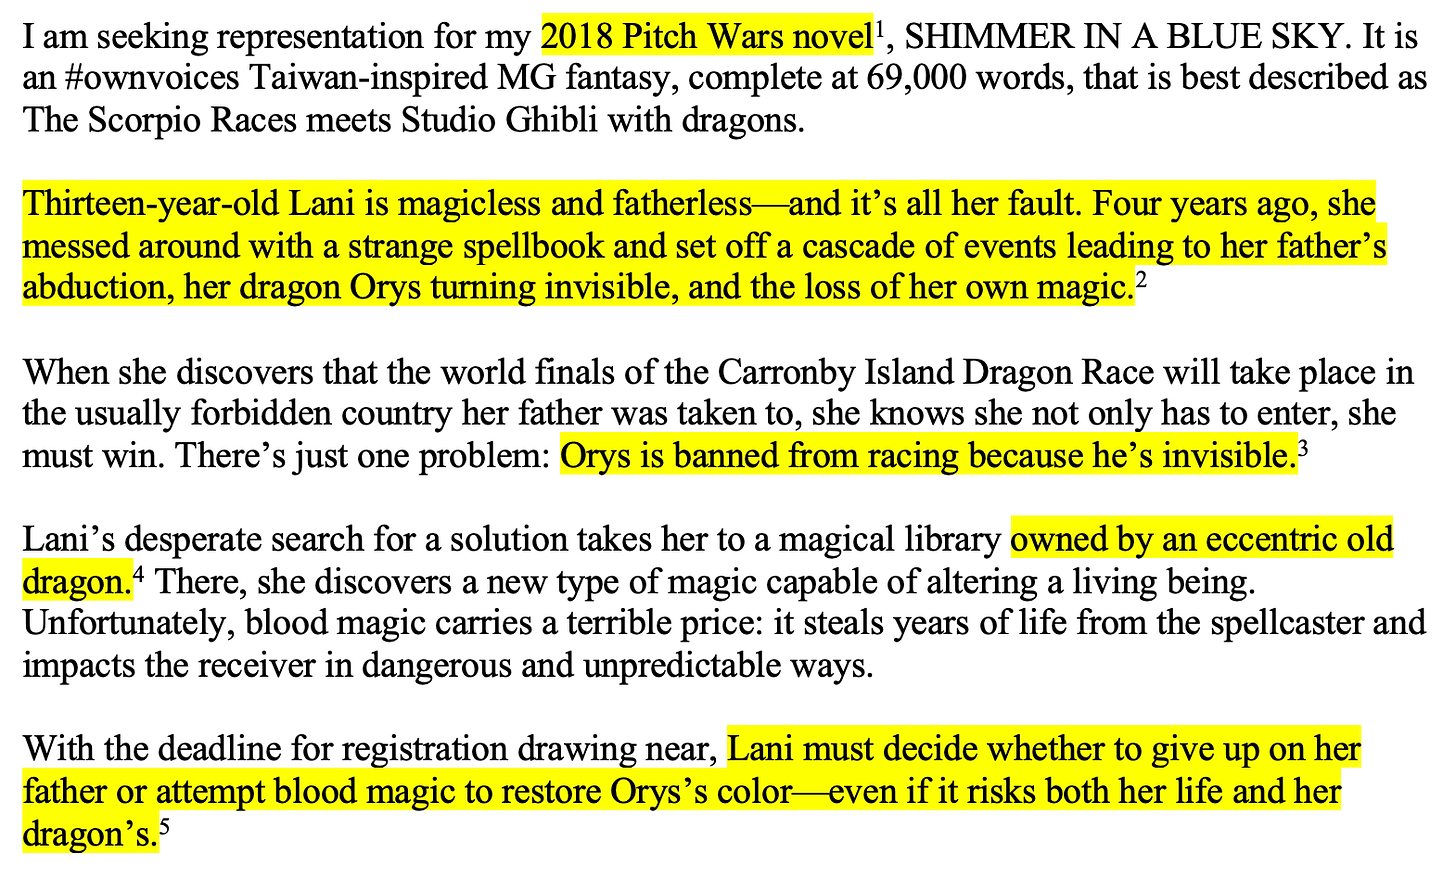 Highlighted text is indicated by [brackets]: I am seeking representation for my [2018 Pitch Wars novel]1, SHIMMER IN A BLUE SKY. It is an #ownvoices Taiwan-inspired MG fantasy, complete at 69,000 words, that is best described as The Scorpio Races meets Studio Ghibli with dragons.  [Thirteen-year-old Lani is magicless and fatherless—and it’s all her fault. Four years ago, she messed around with a strange spellbook and set off a cascade of events leading to her father’s abduction, her dragon Orys turning invisible, and the loss of her own magic.]2  When she discovers that the world finals of the Carronby Island Dragon Race will take place in the usually forbidden country her father was taken to, she knows she not only has to enter, she must win. There’s just one problem: [Orys is banned from racing because he’s invisible.]3  Lani’s desperate search for a solution takes her to a magical library [owned by an eccentric old dragon.]4 There, she discovers a new type of magic capable of altering a living being. Unfortunately, blood magic carries a terrible price: it steals years of life from the spellcaster and impacts the receiver in dangerous and unpredictable ways.  With the deadline for registration drawing near, [Lani must decide whether to give up on her father or attempt blood magic to restore Orys’s color—even if it risks both her life and her dragon’s.]5